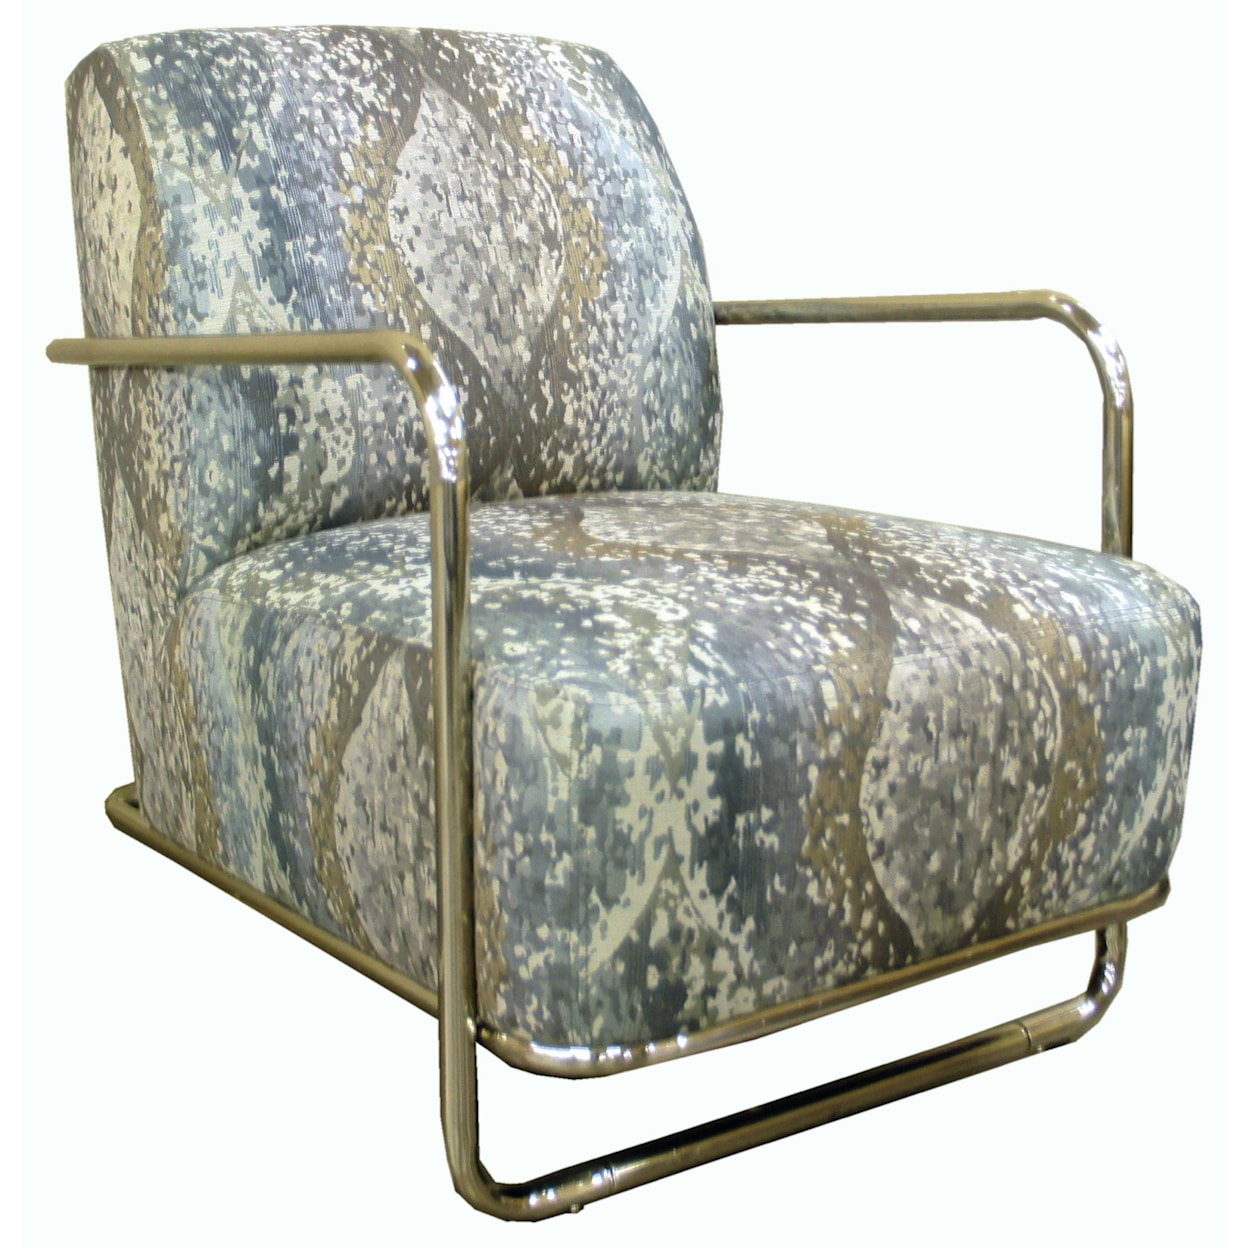 Jonathan Louis Accentuates Brushed Nickel Accent Chair